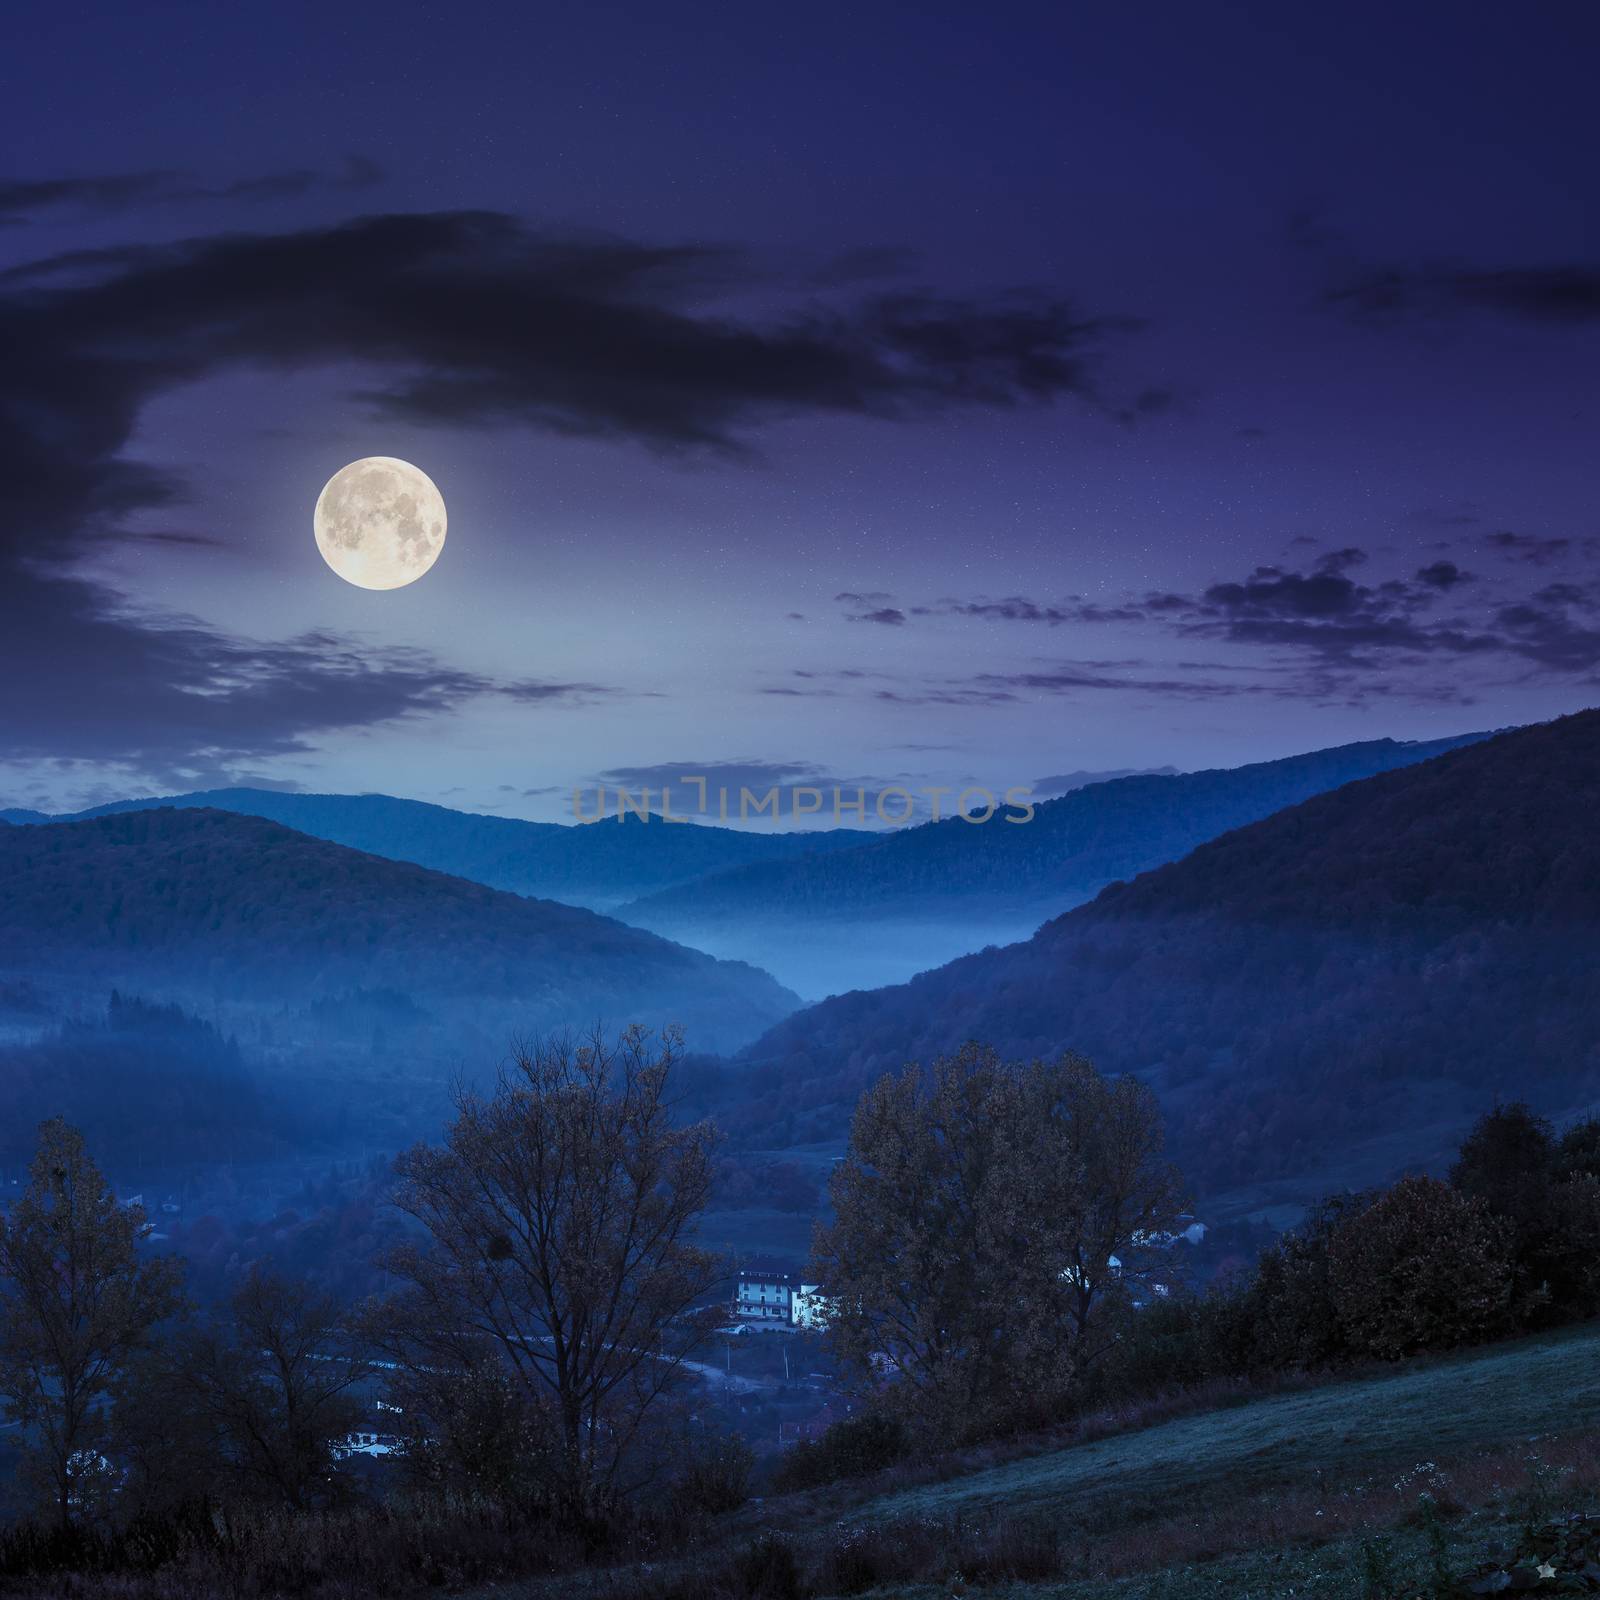 autumn landscape. village on the hillside. forest in fog on mountains at night in full moon light